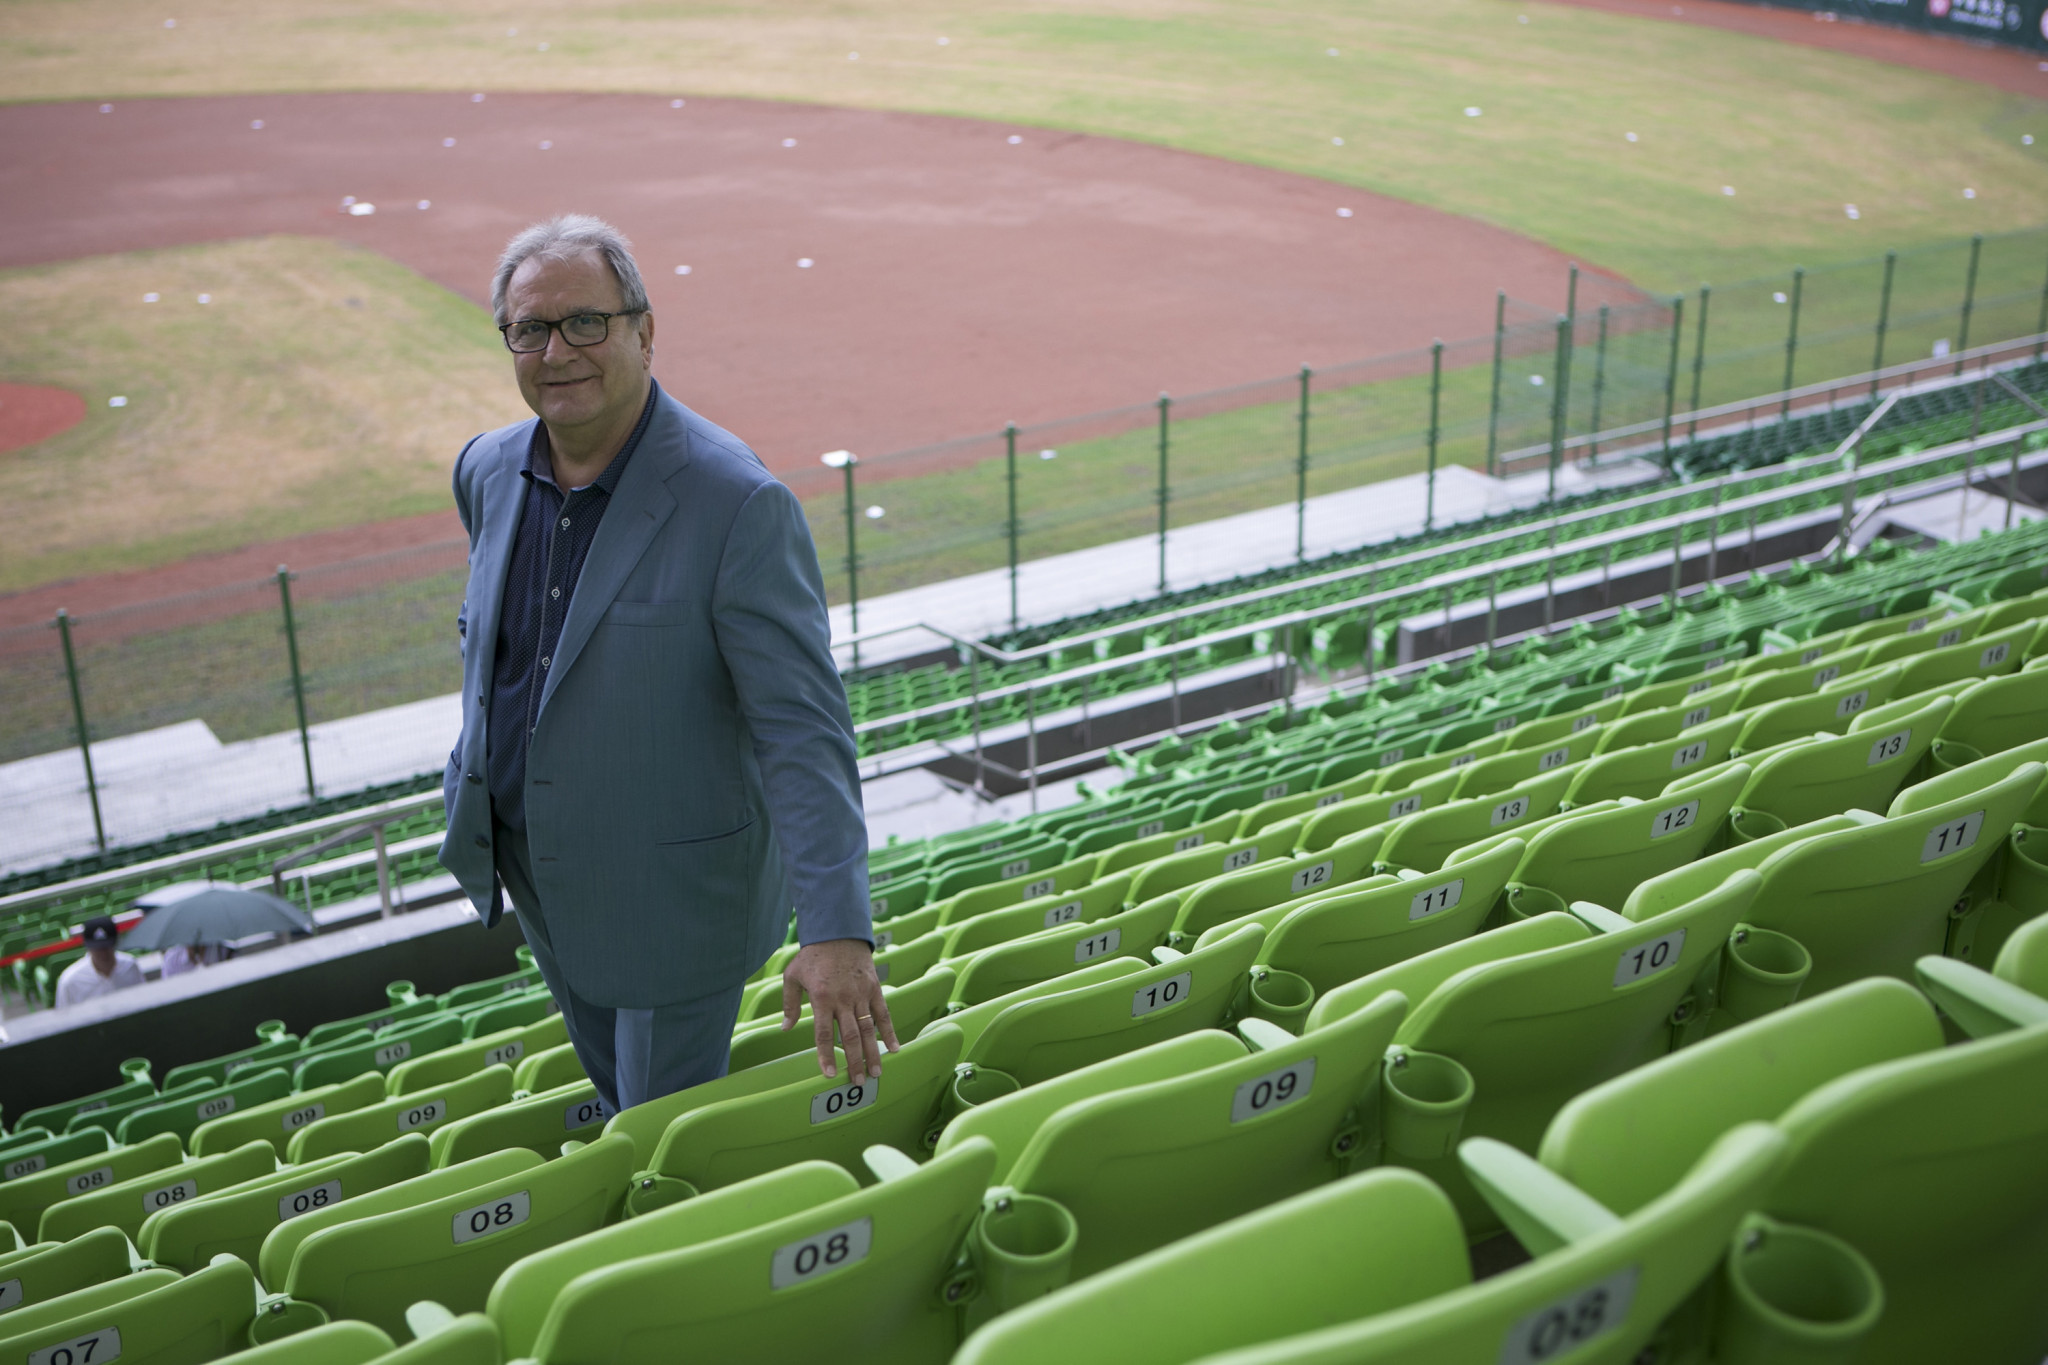 Riccardo Fraccari wants there to be a billion baseball and softball fans and players by the end of the decade ©Getty Images